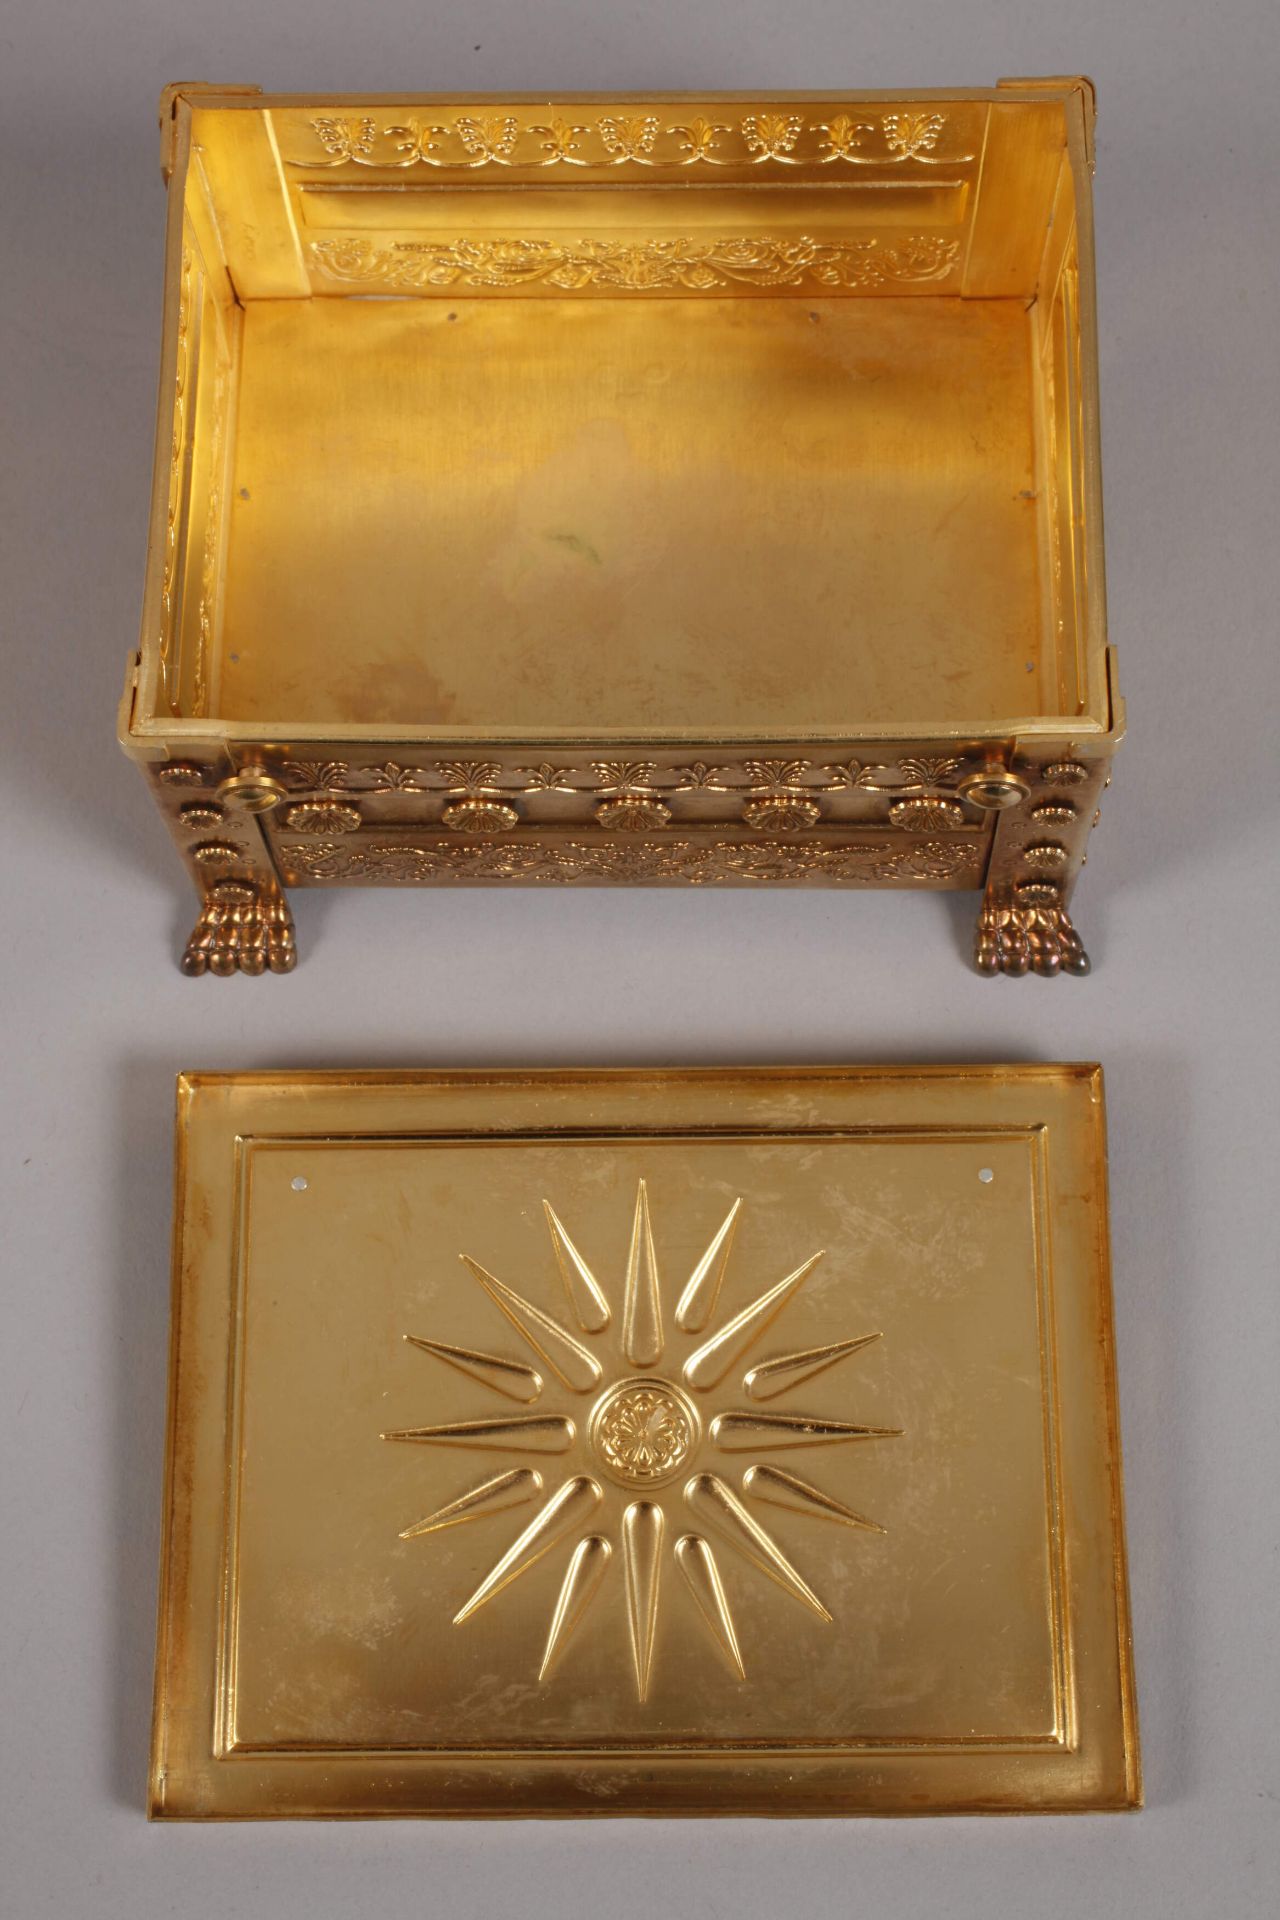 Silver box in case - Image 6 of 8